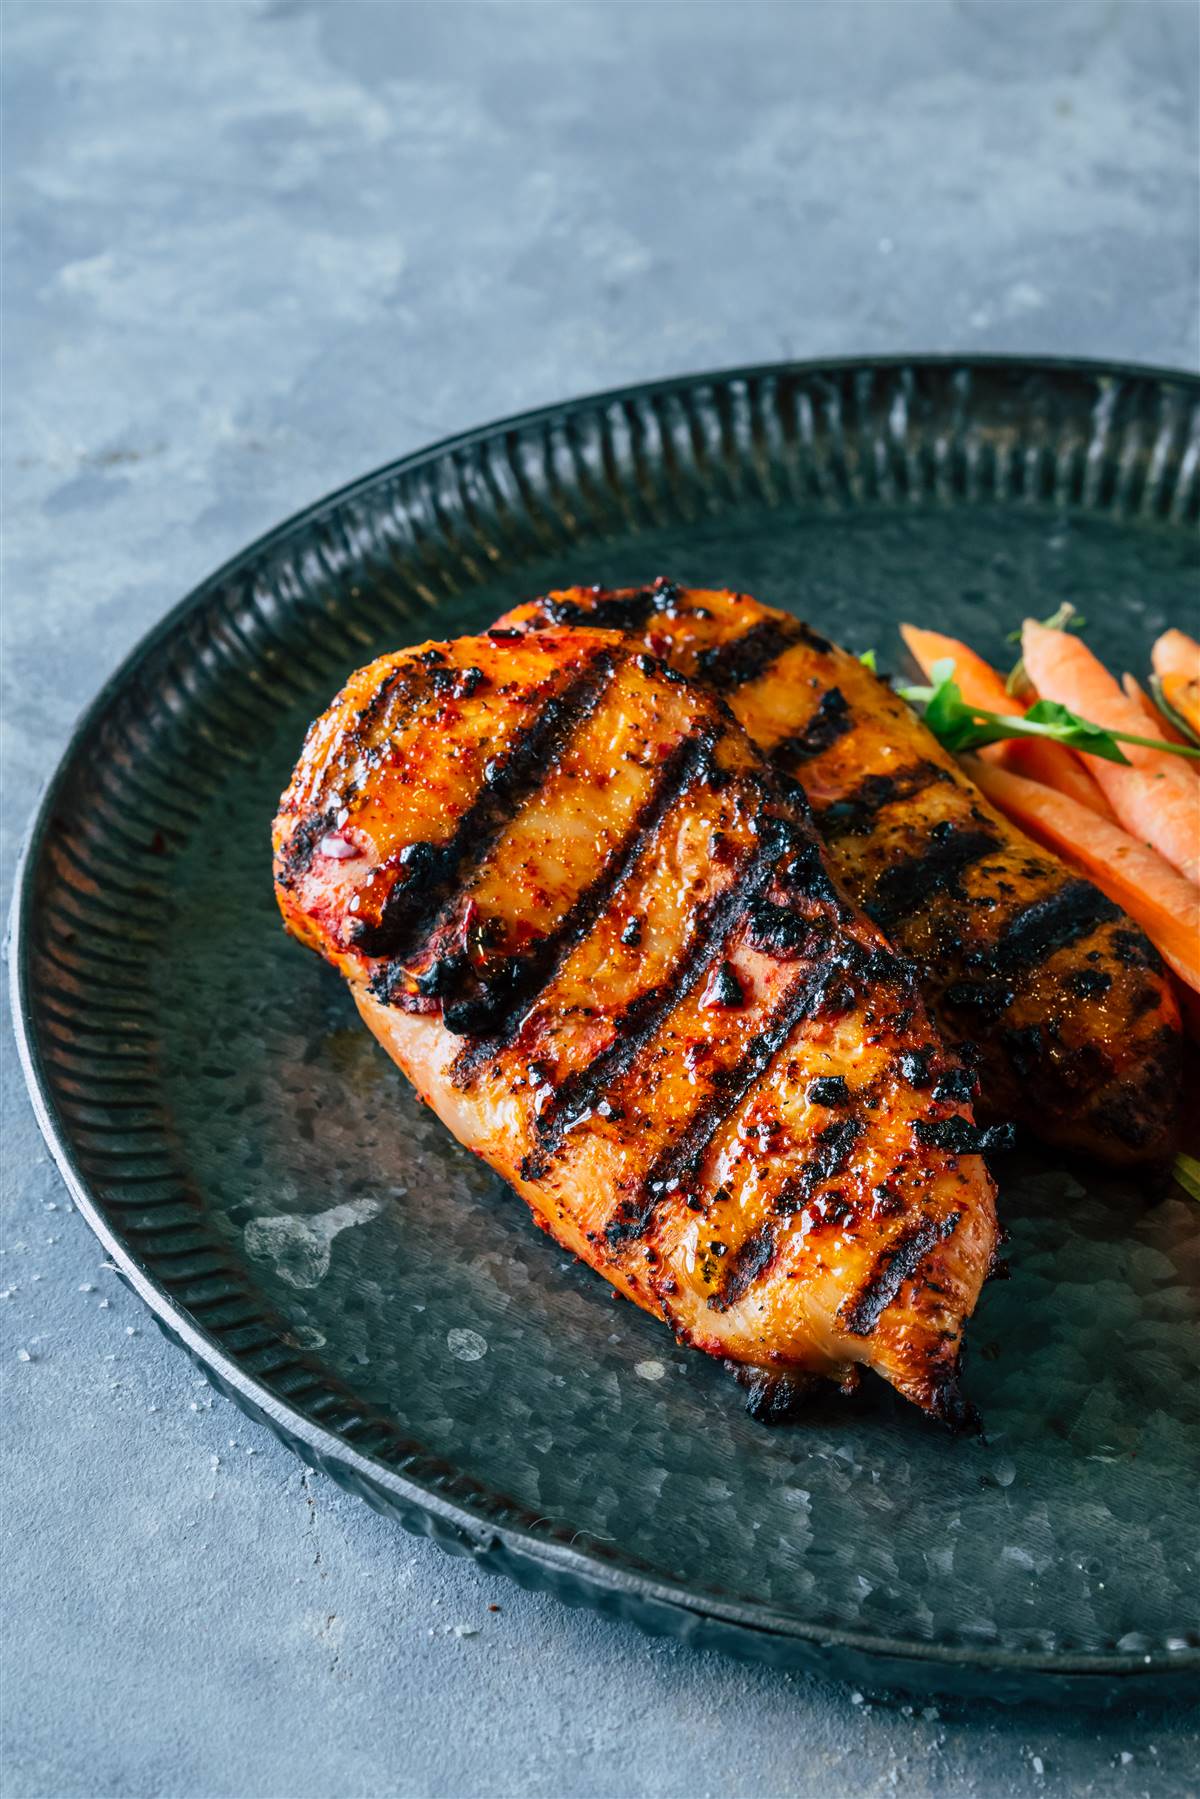 Barbecued Chicken Breast